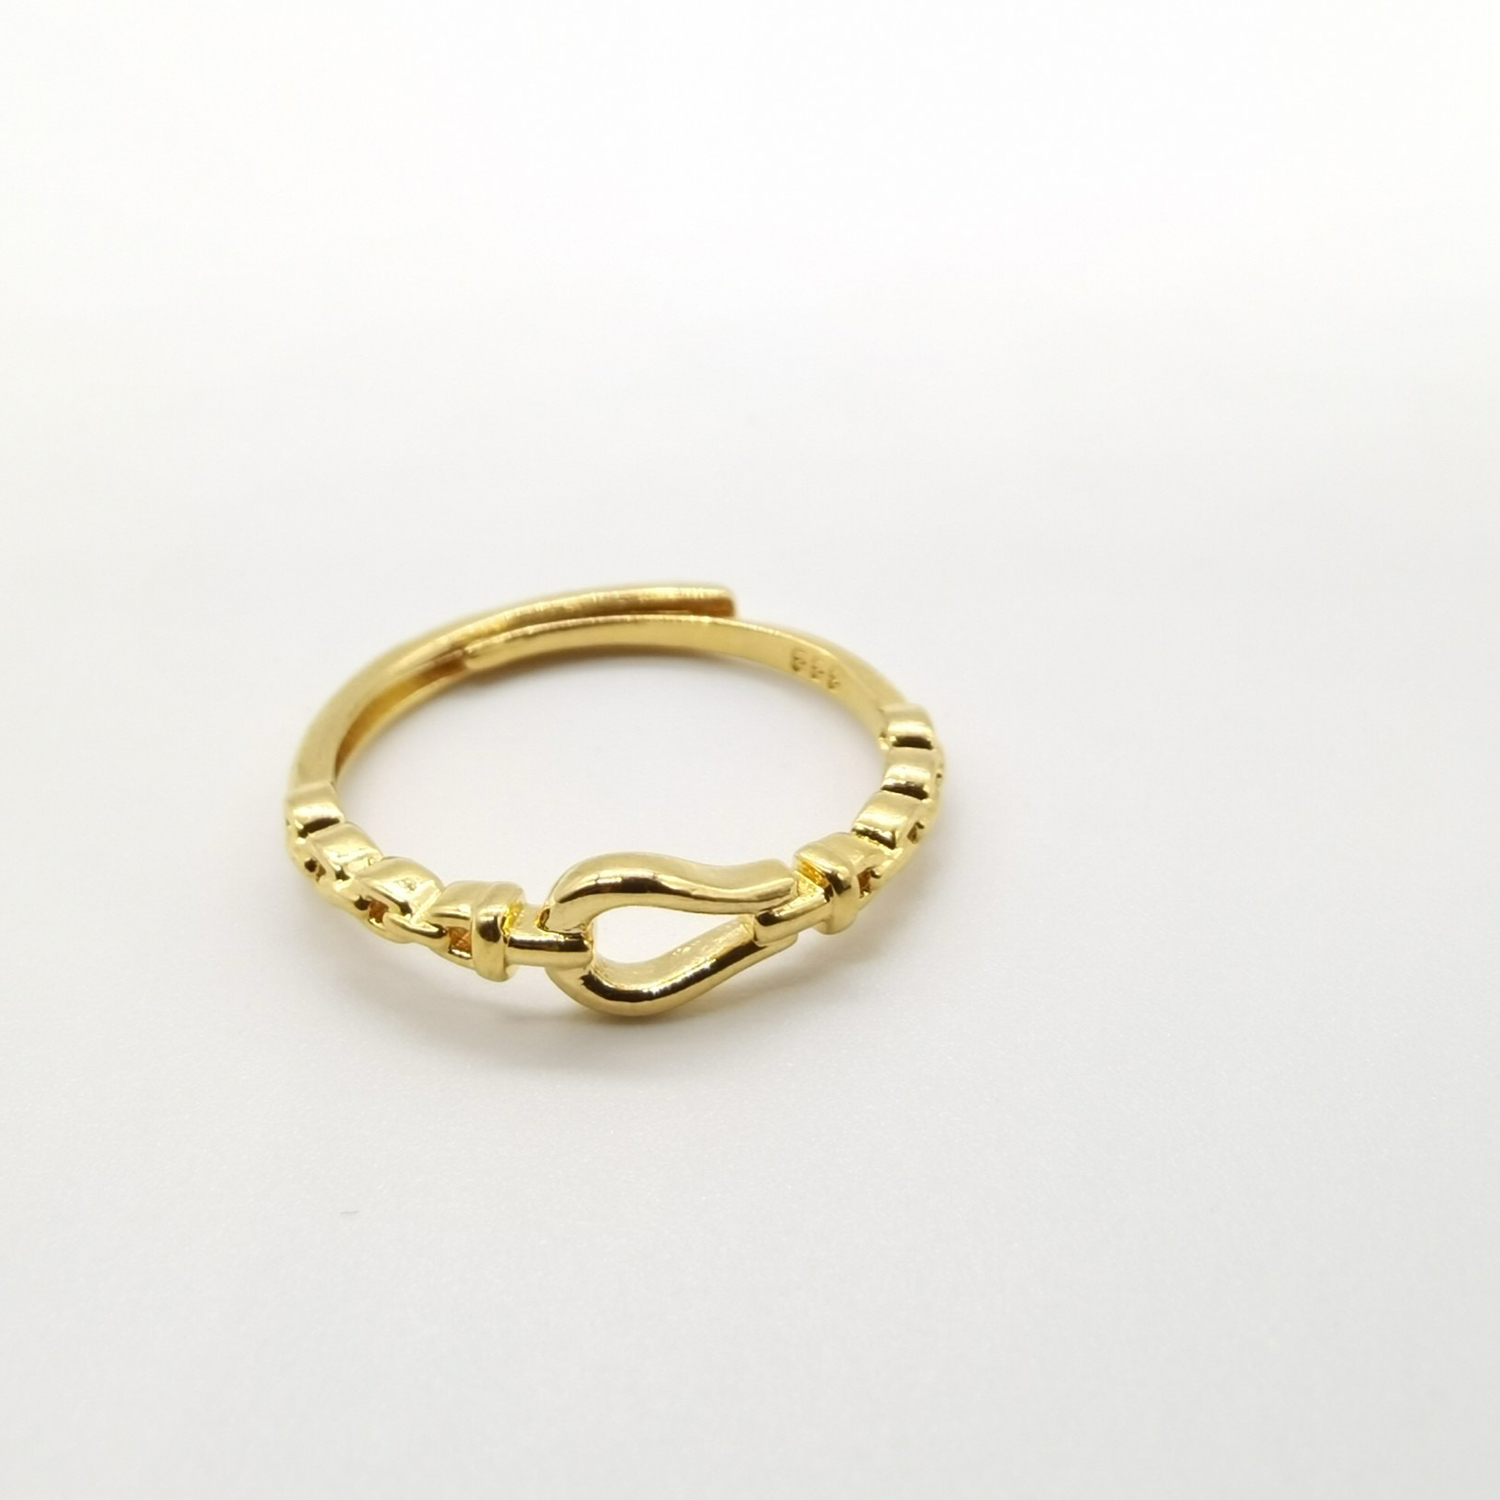 Alluvial gold vacuum electroplating 24K gold horseshoe buckle live ring